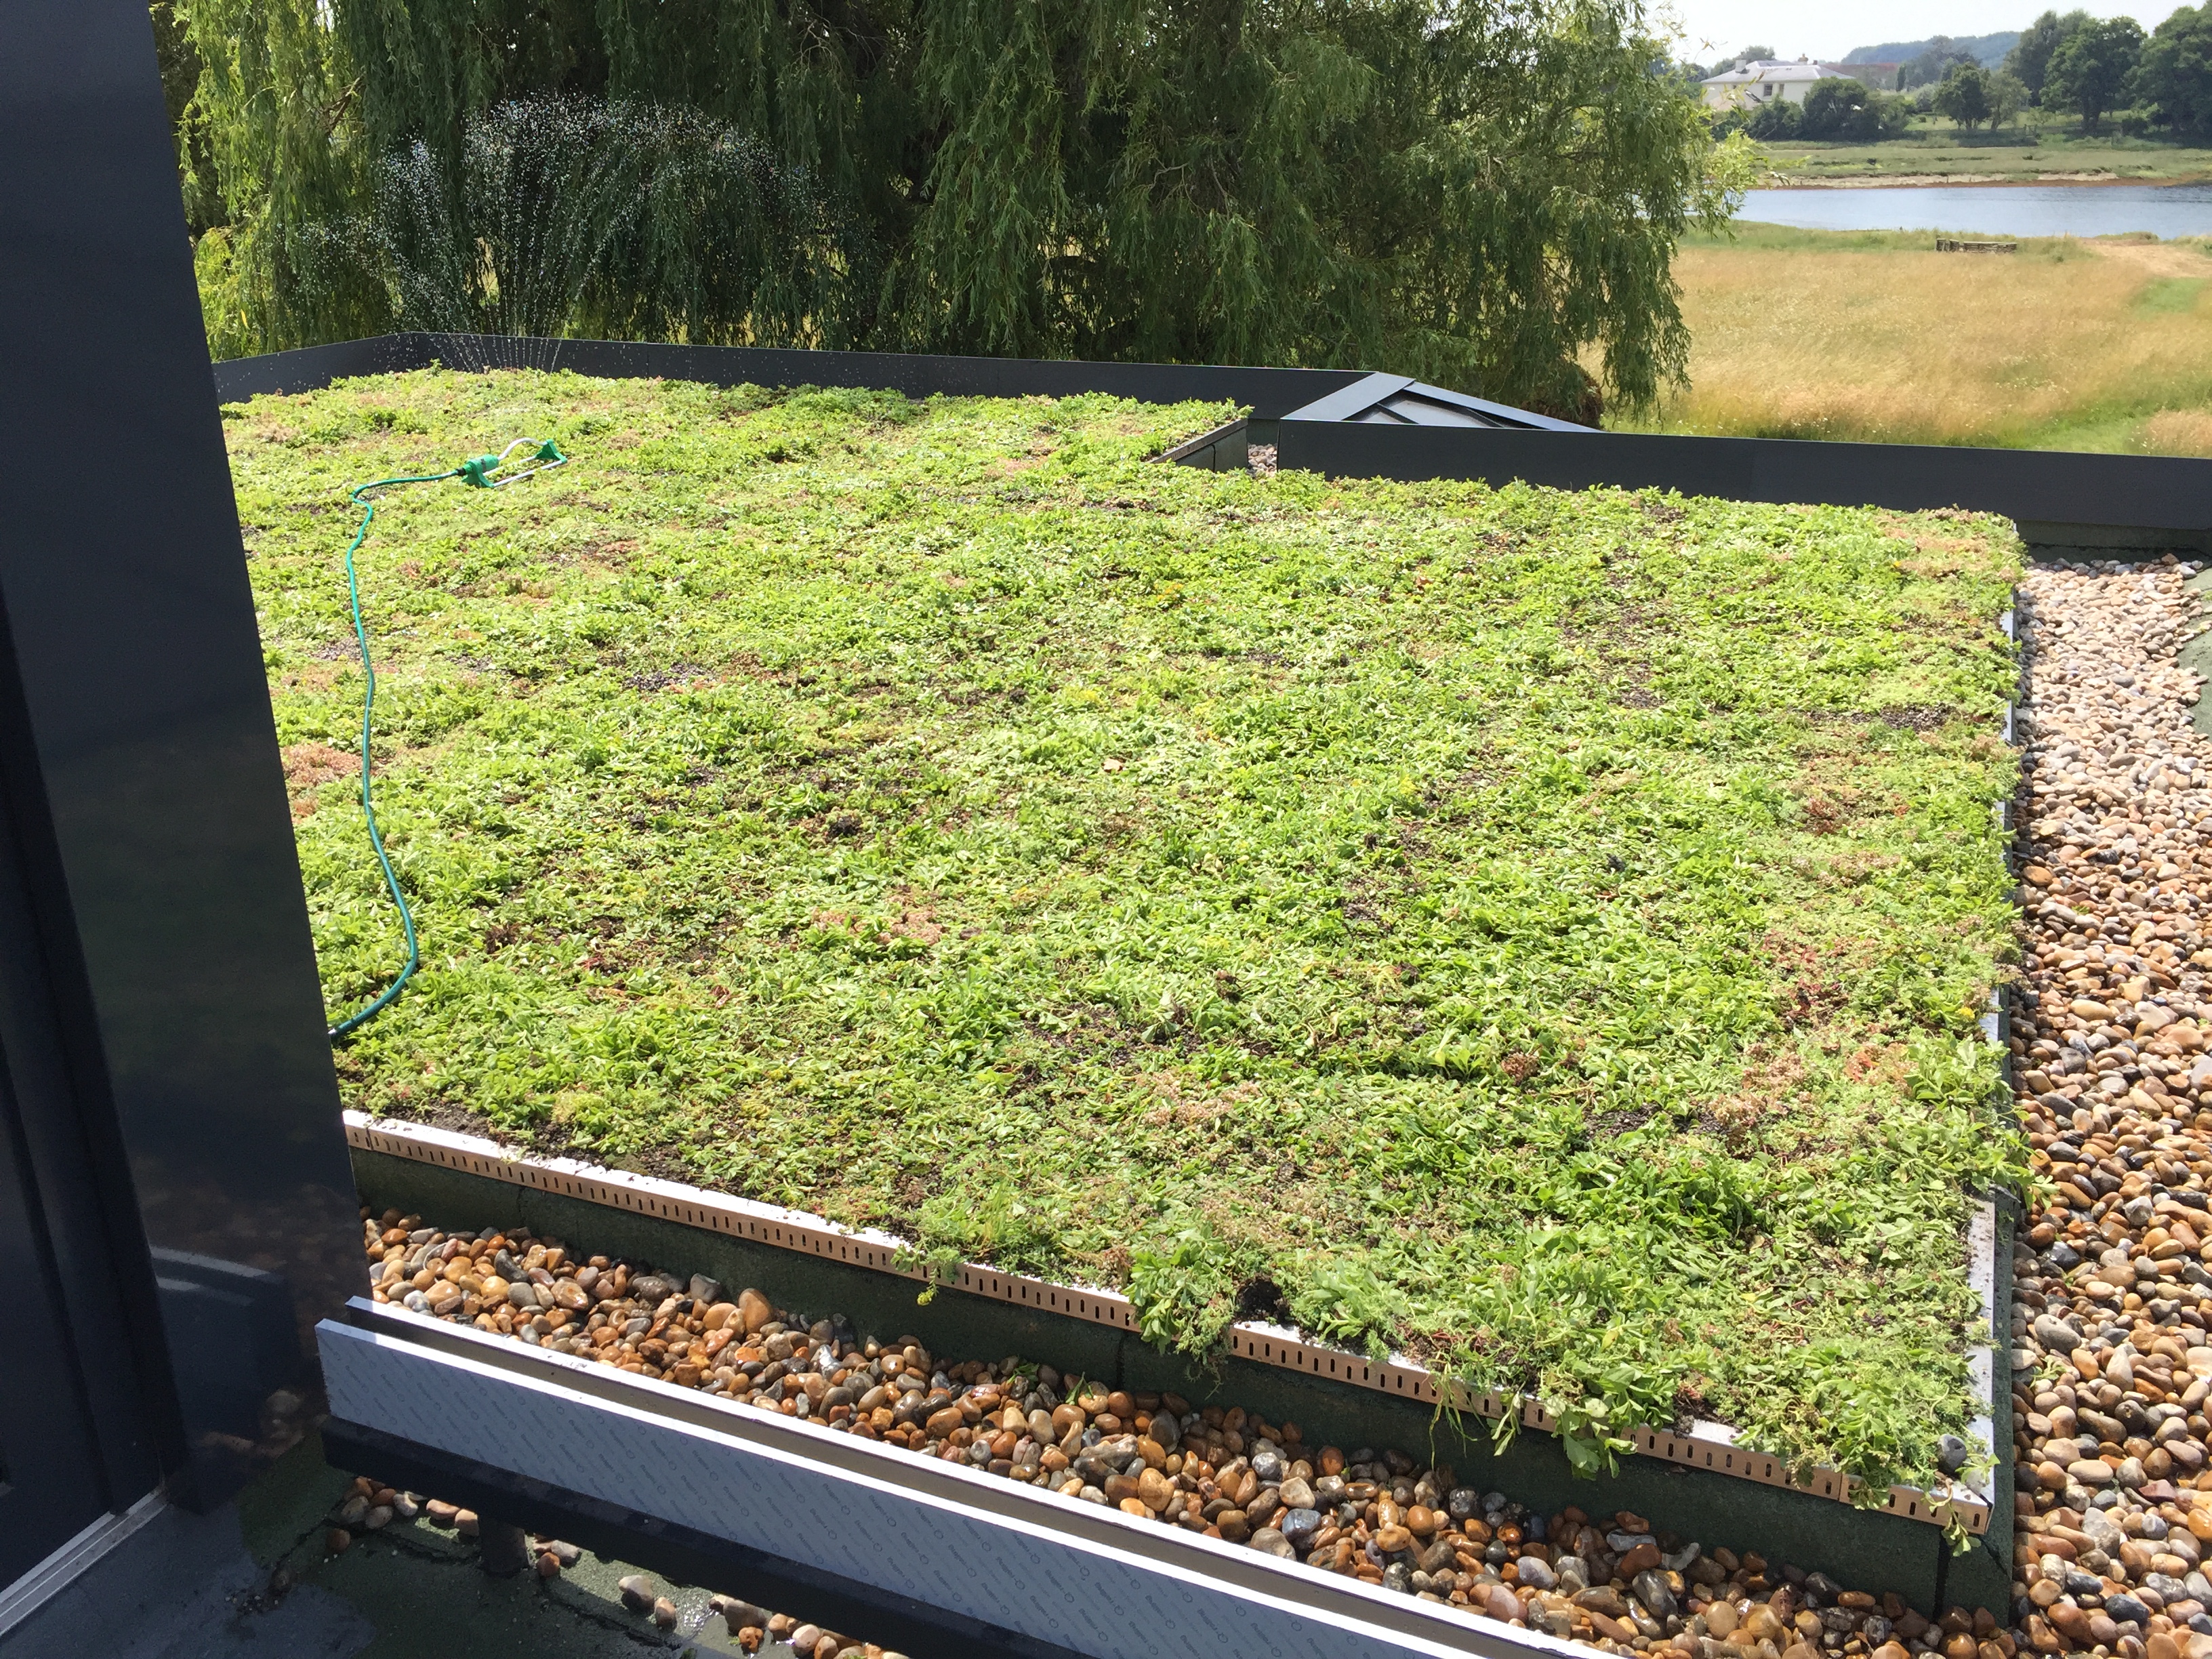 Kingsley Roofing complete sedum green roof on residential property in Chichester, Sussex.